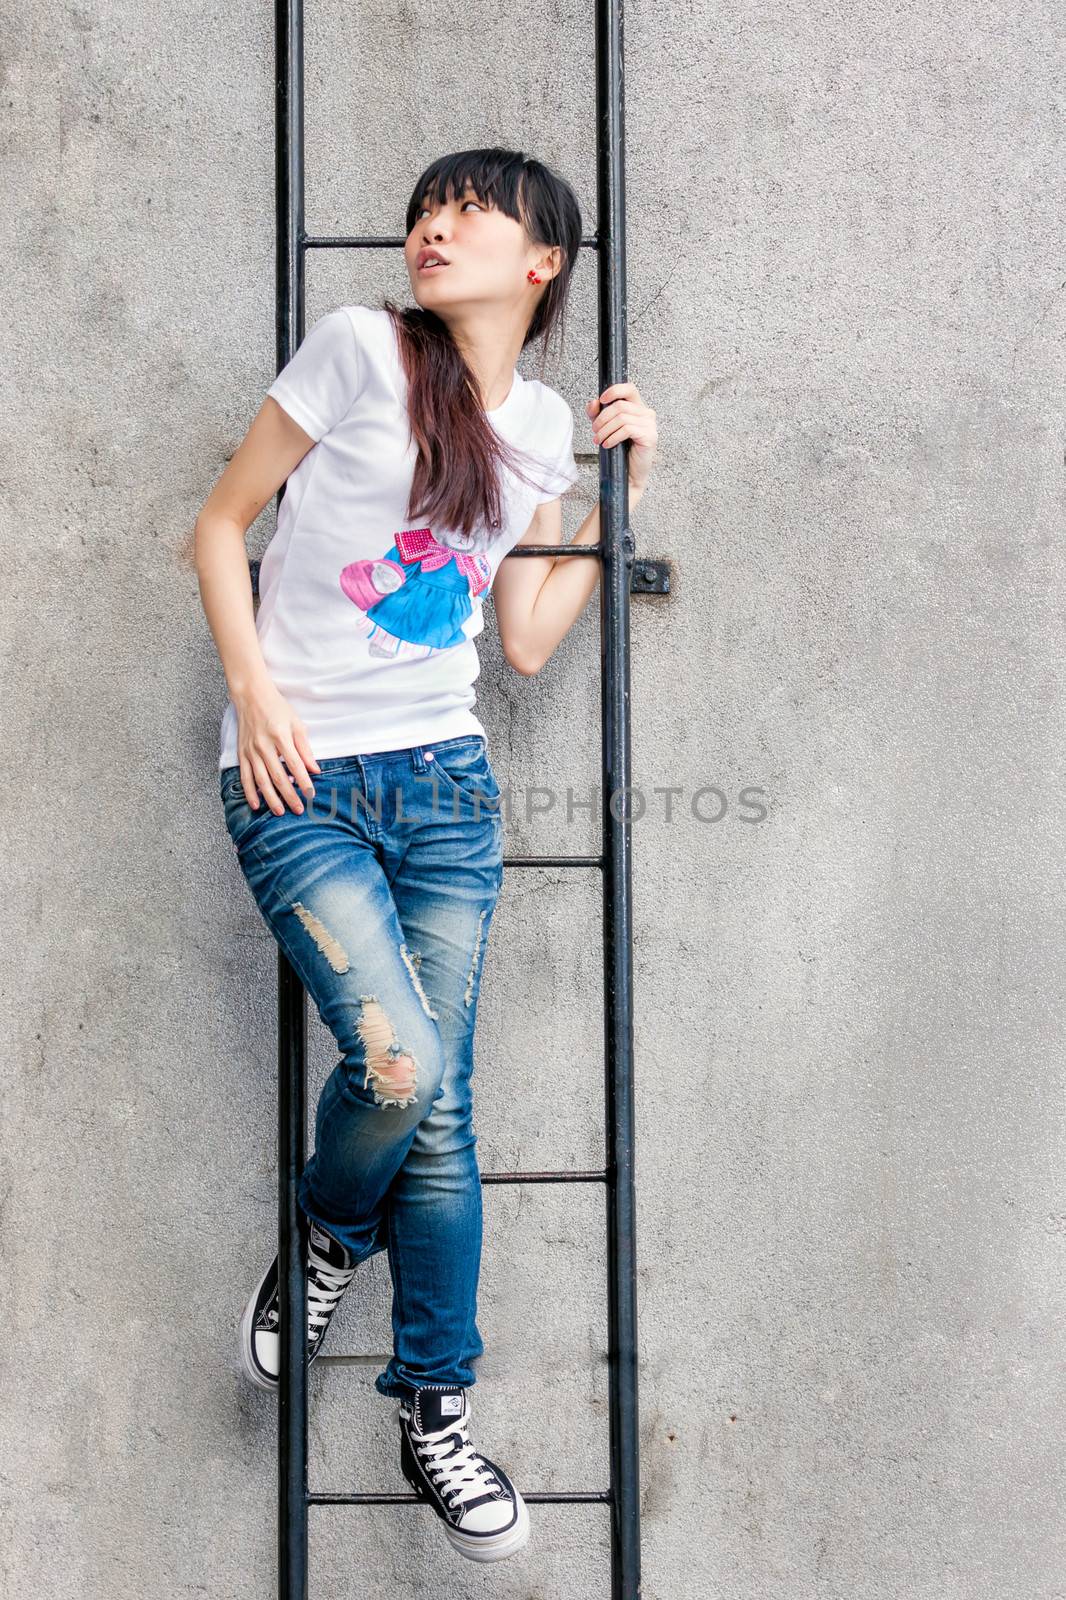 Asian girl on a ladder by imagesbykenny